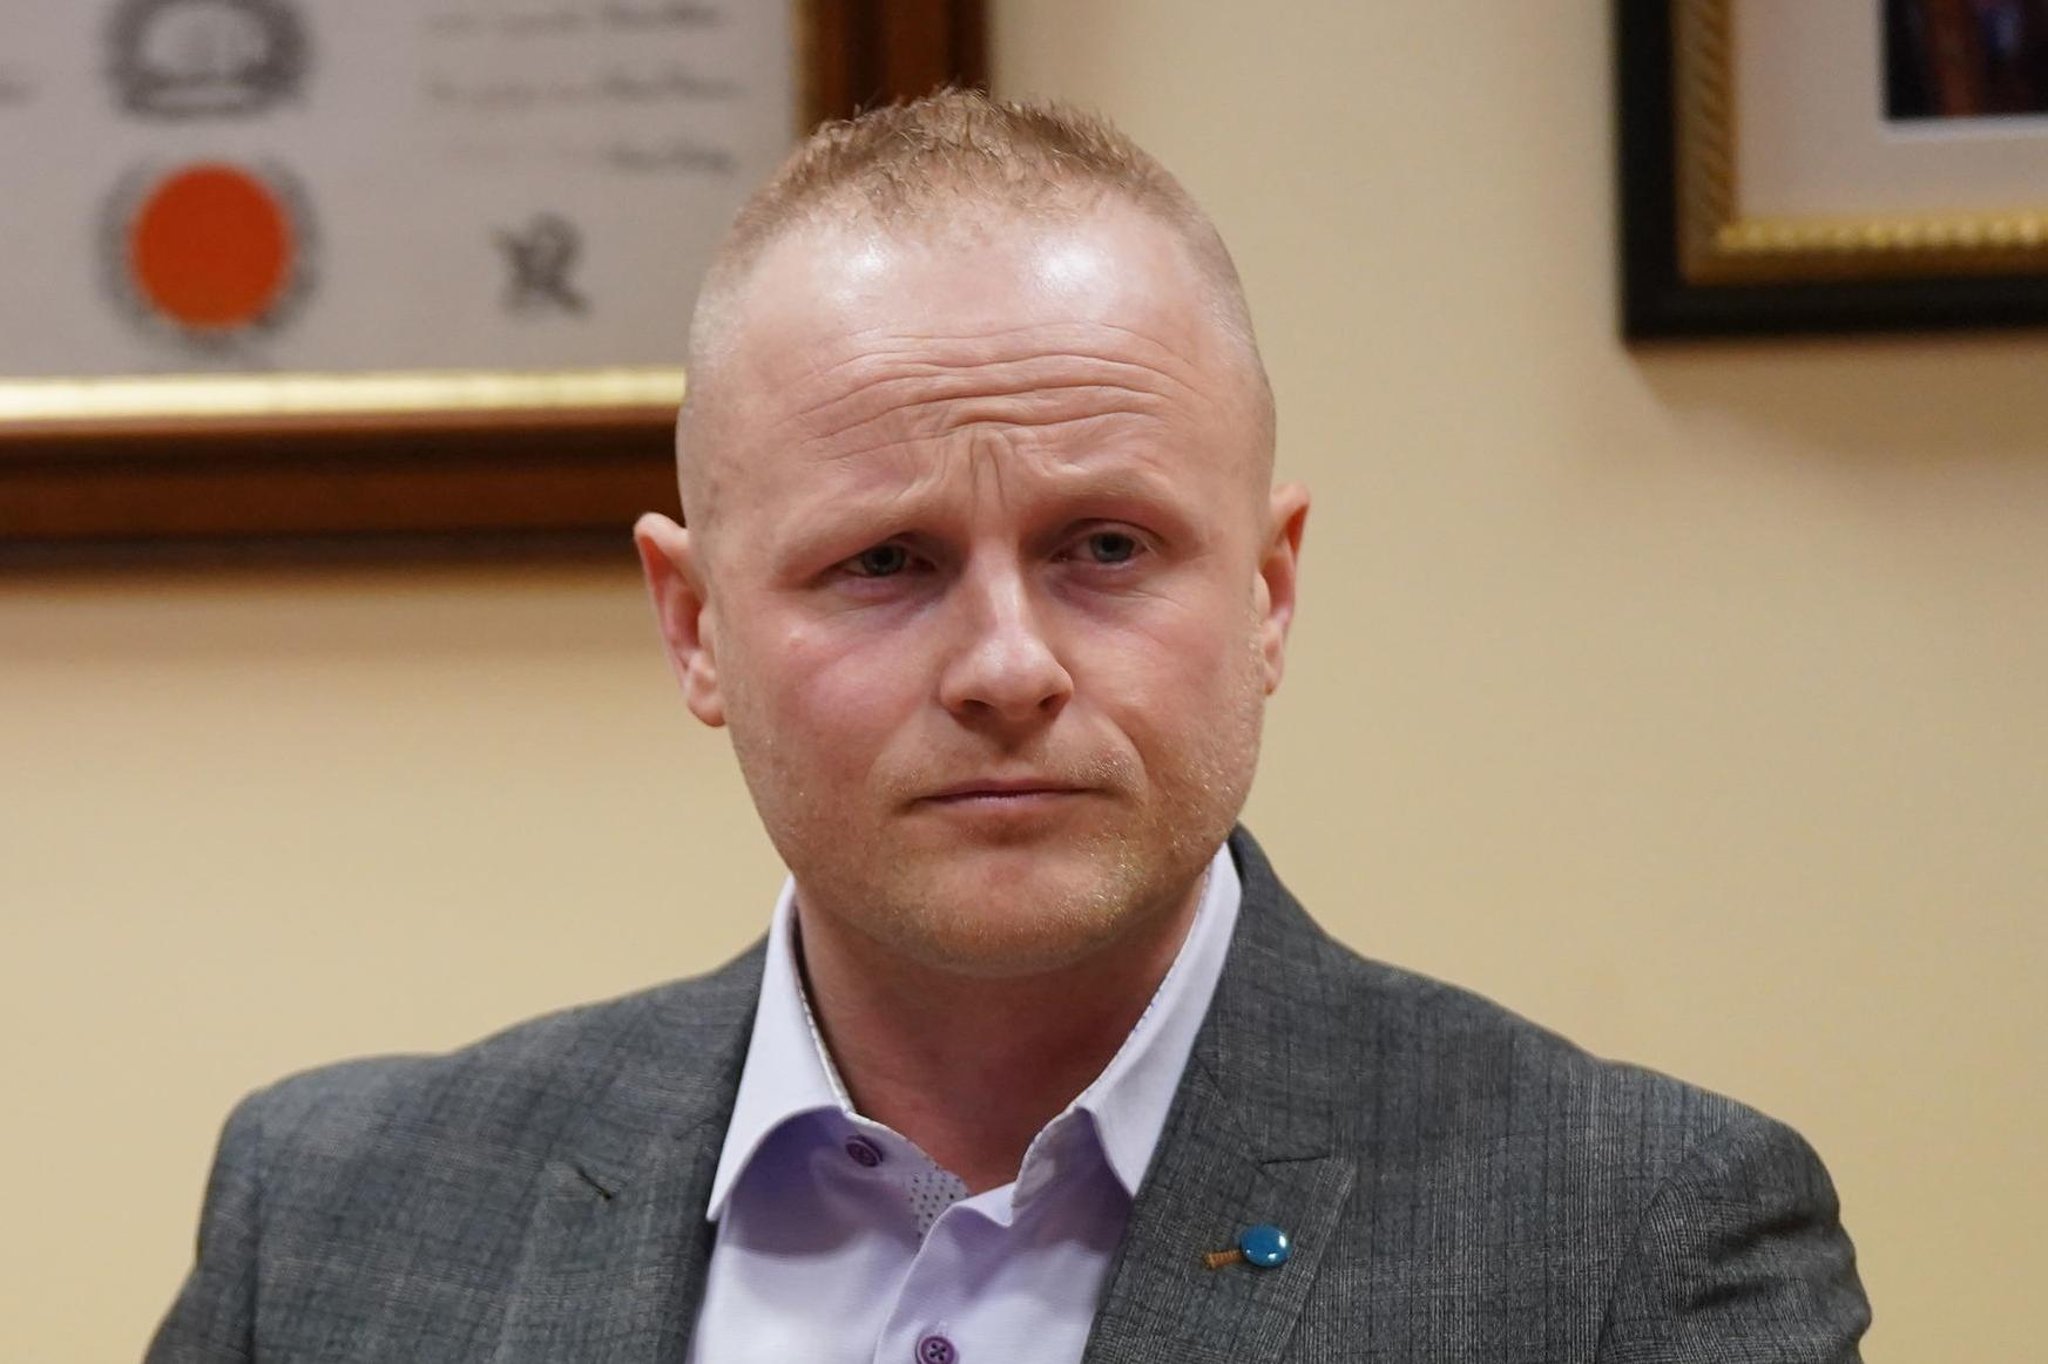 Bryson: Dissident threats against loyalist leaders are not justified